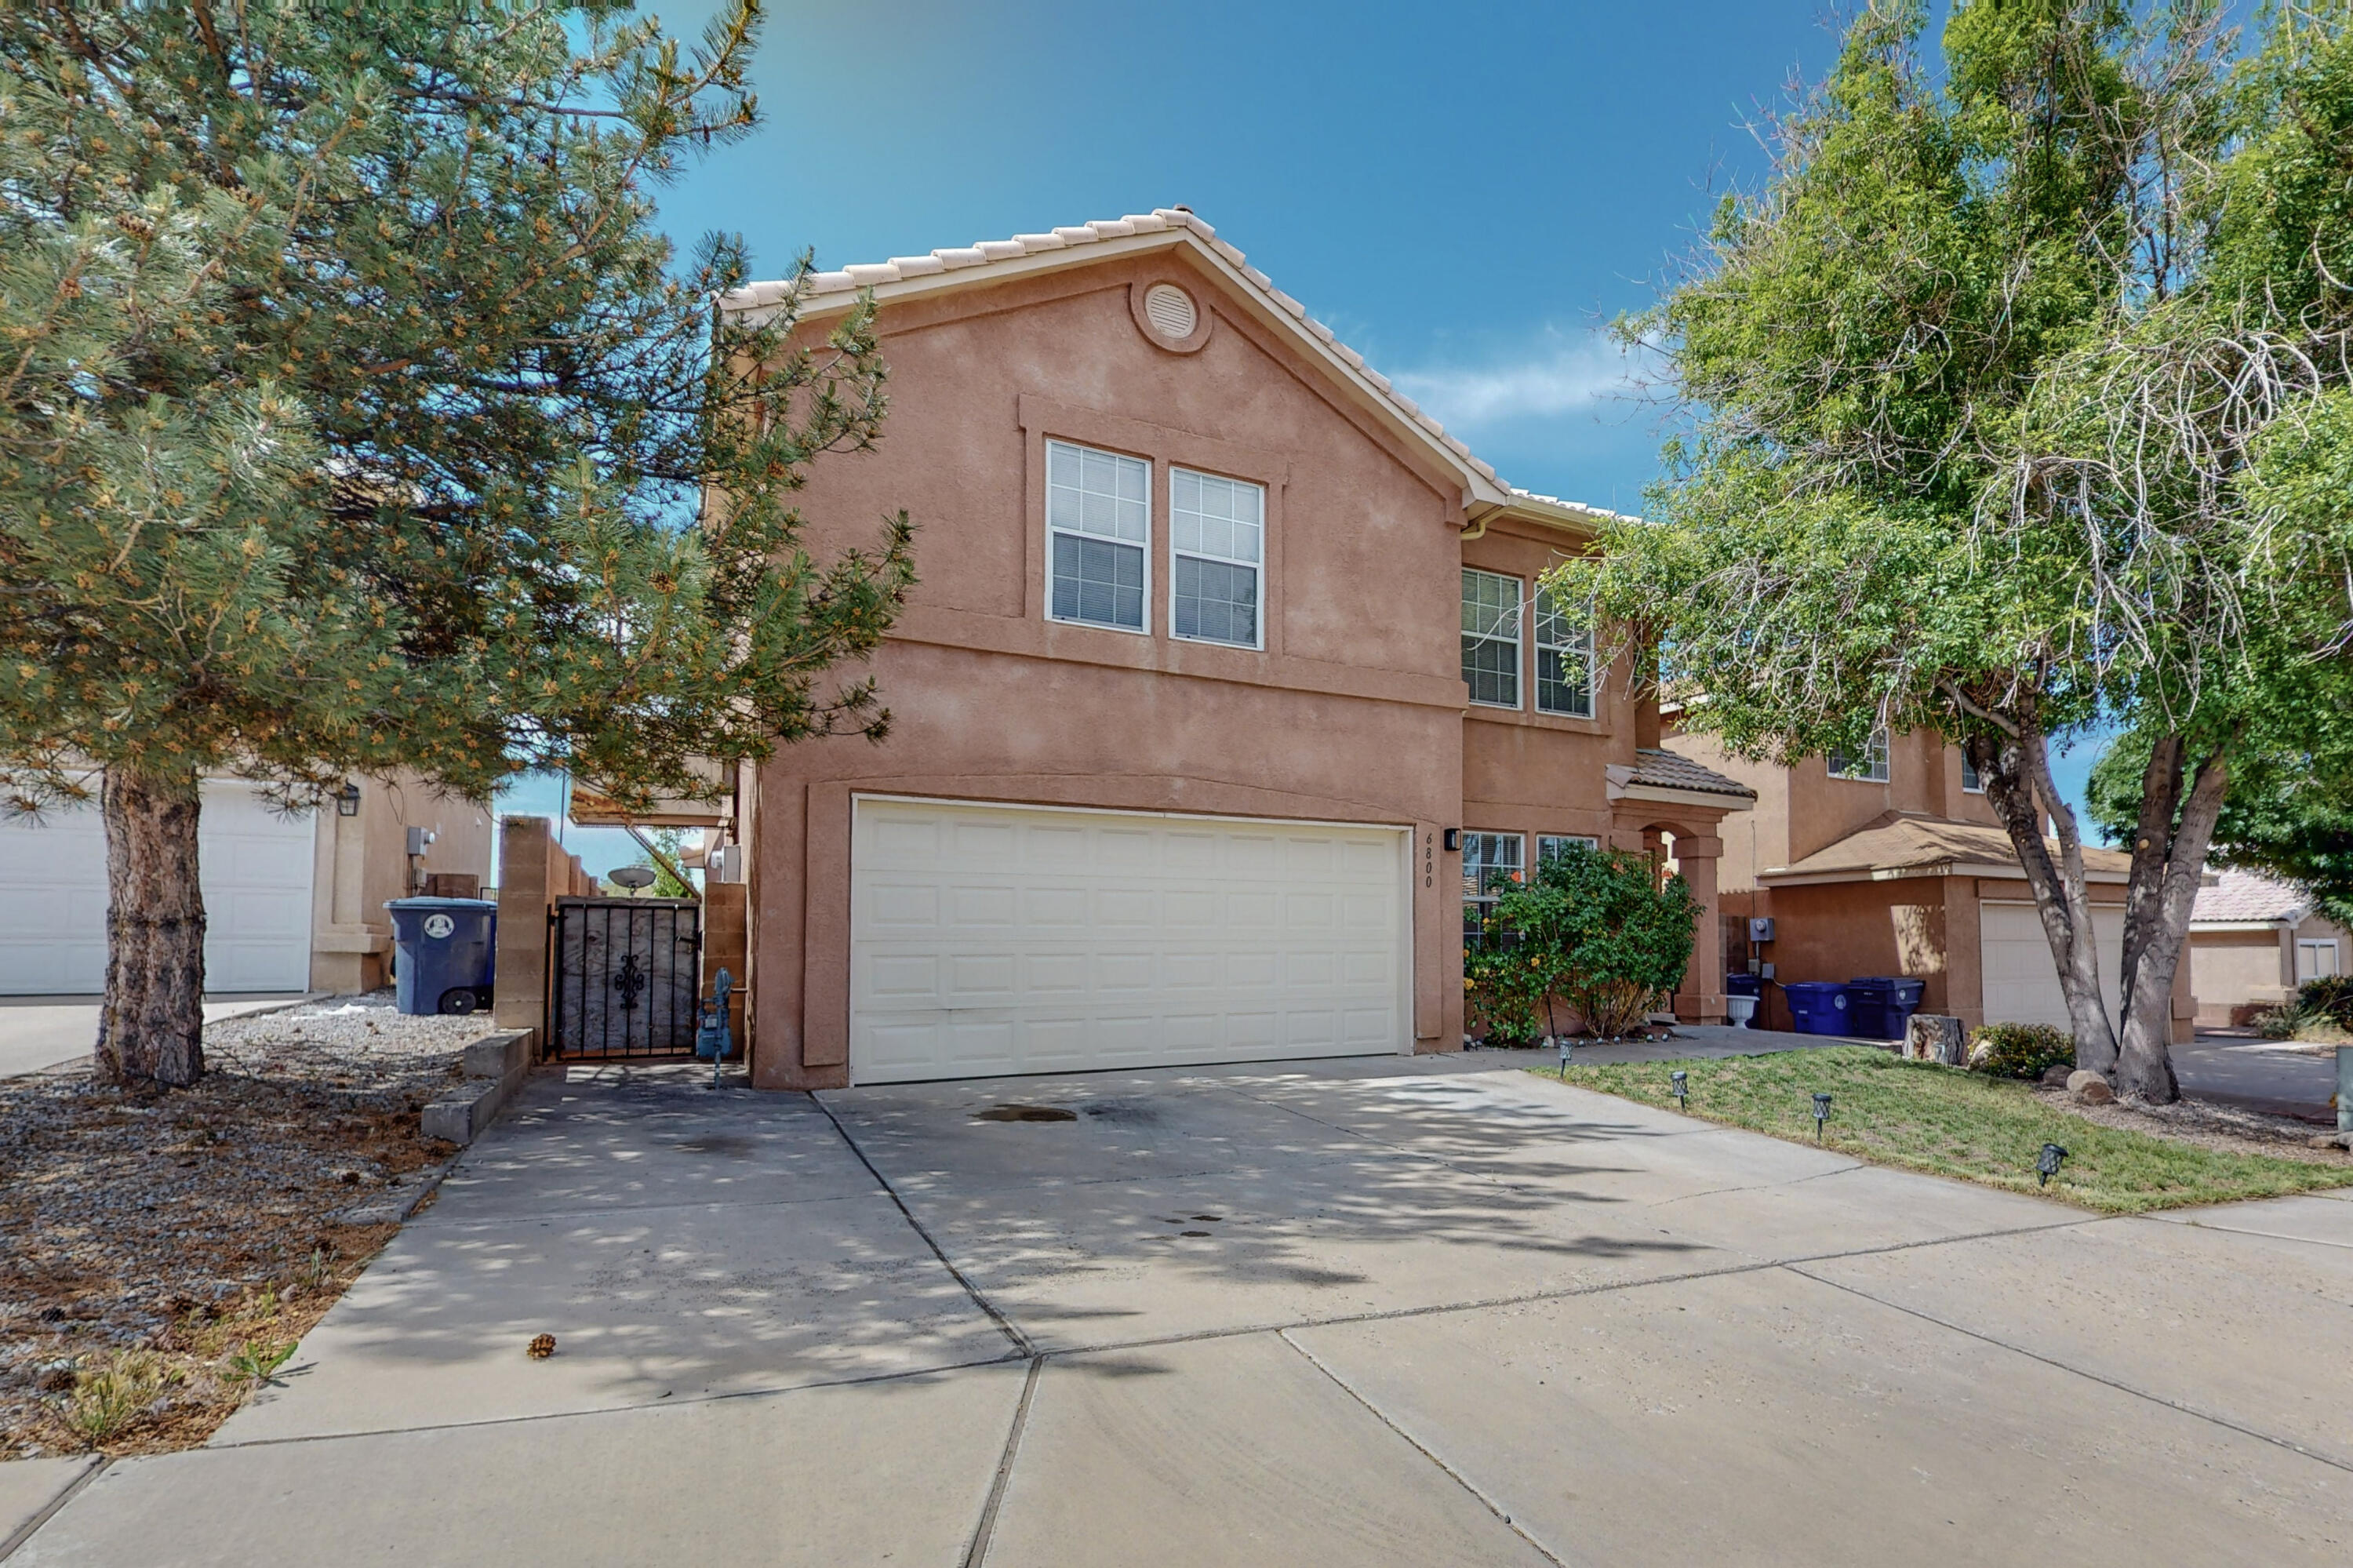 Open House Sat the 27th 10:30am till 3:30pm. And Sunday the 30th 11-230. Come visit this beautifully updated home in the La Cueva Oeste subdivision!  With incredible wood and vinyl flooring, granite countertops, and so much natural light!  The centralized staircase leads you to an additional loft area to be used for any of your family's needs!  The backyard is its own oasis with a waterfall pond and space for outdoor dining, relaxation, and playing.  This gorgeous home is a must see!